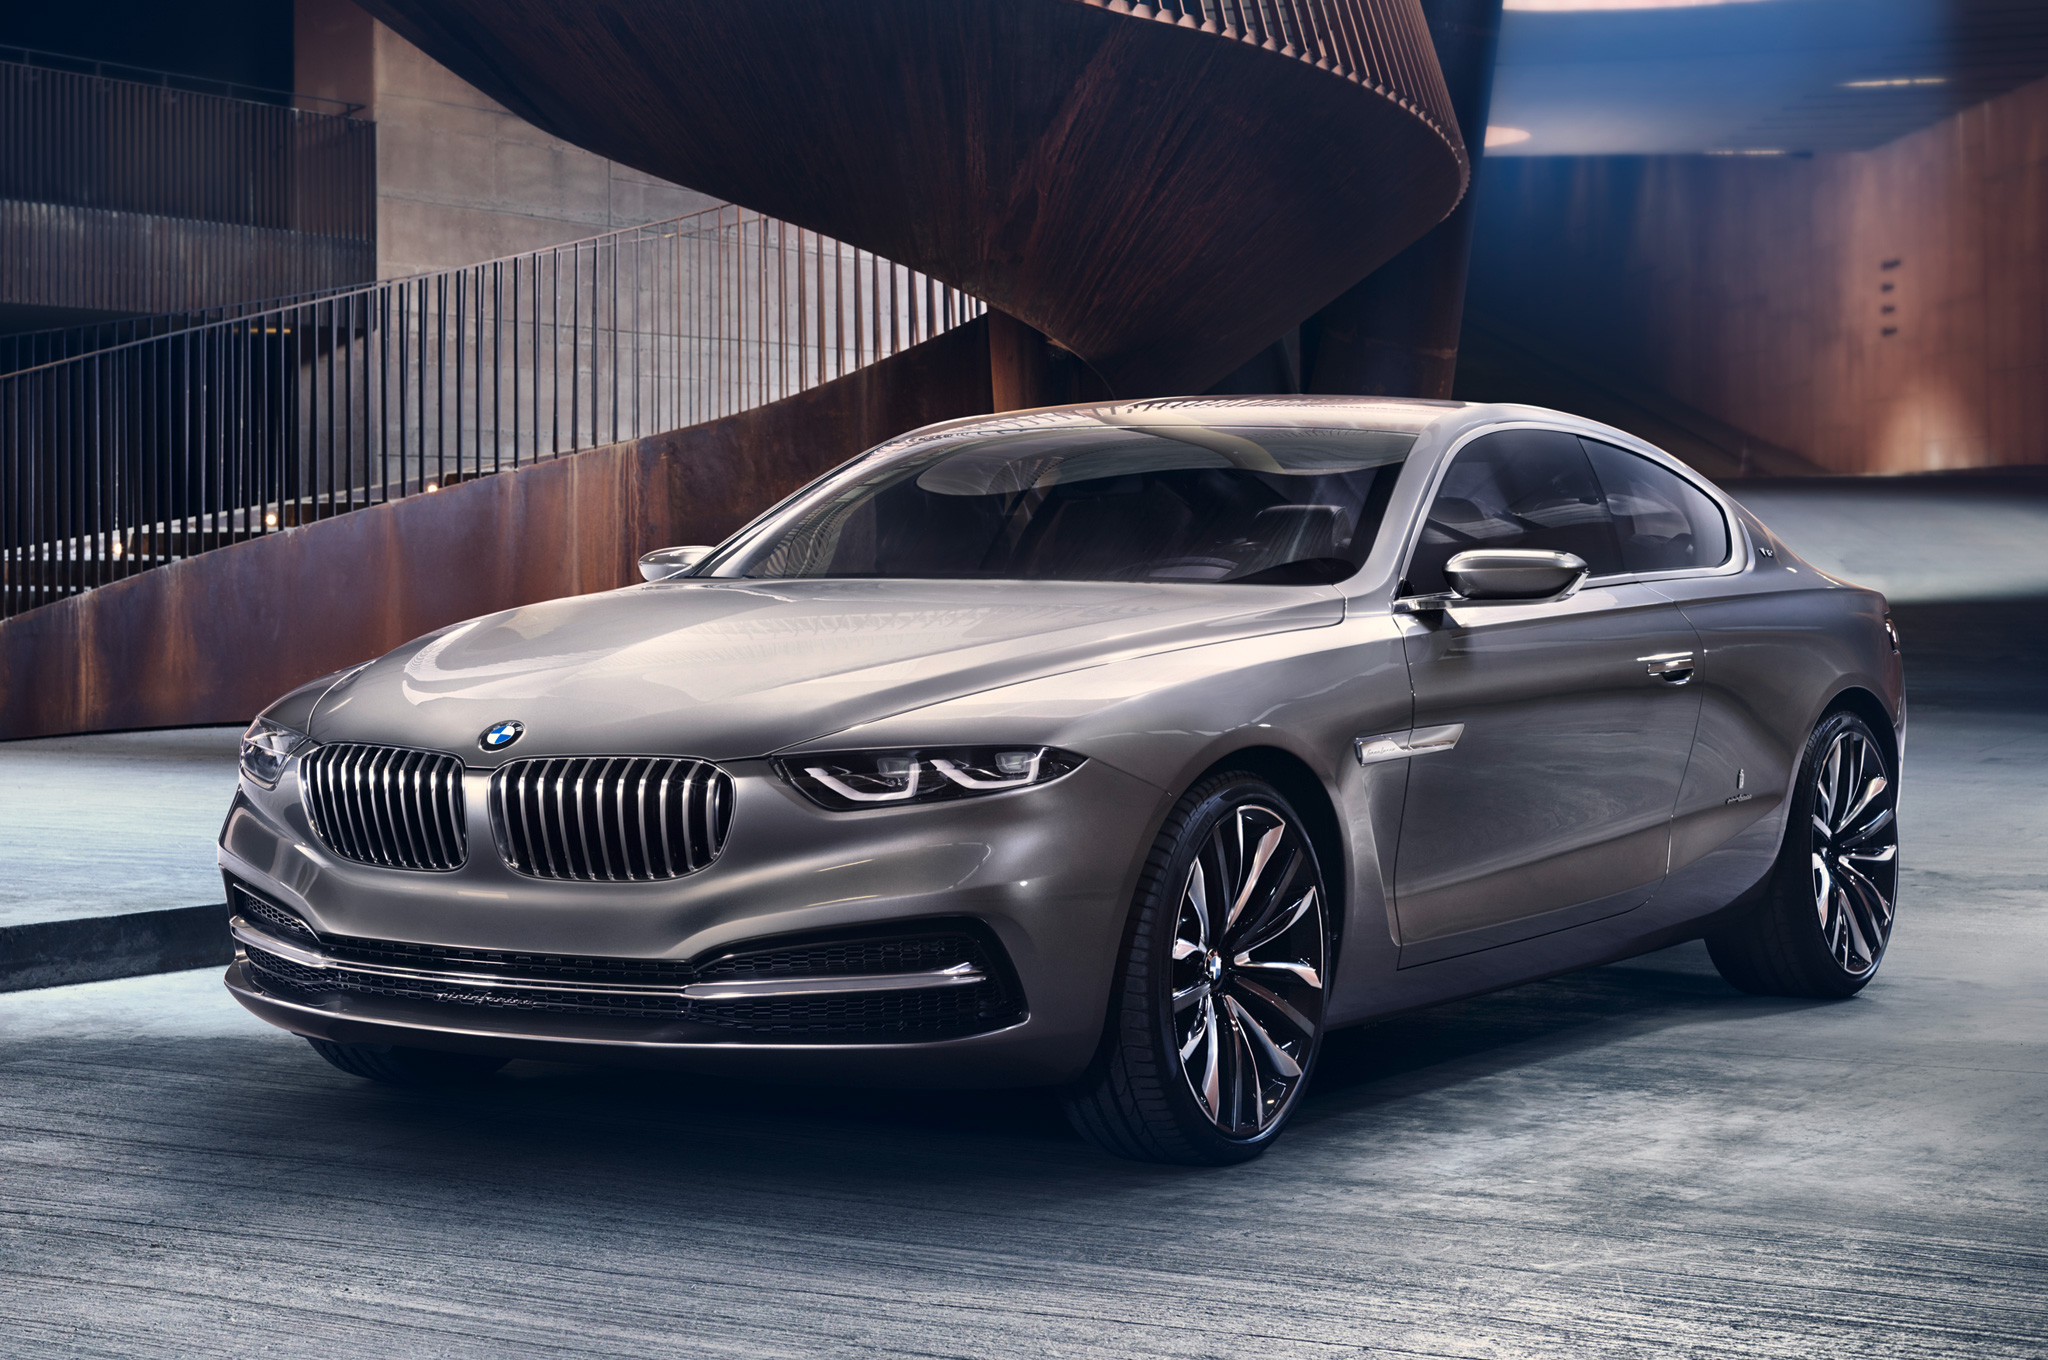 bmw-pininfarina-gran-lusso-coupe-concept-front-three-quarters-view